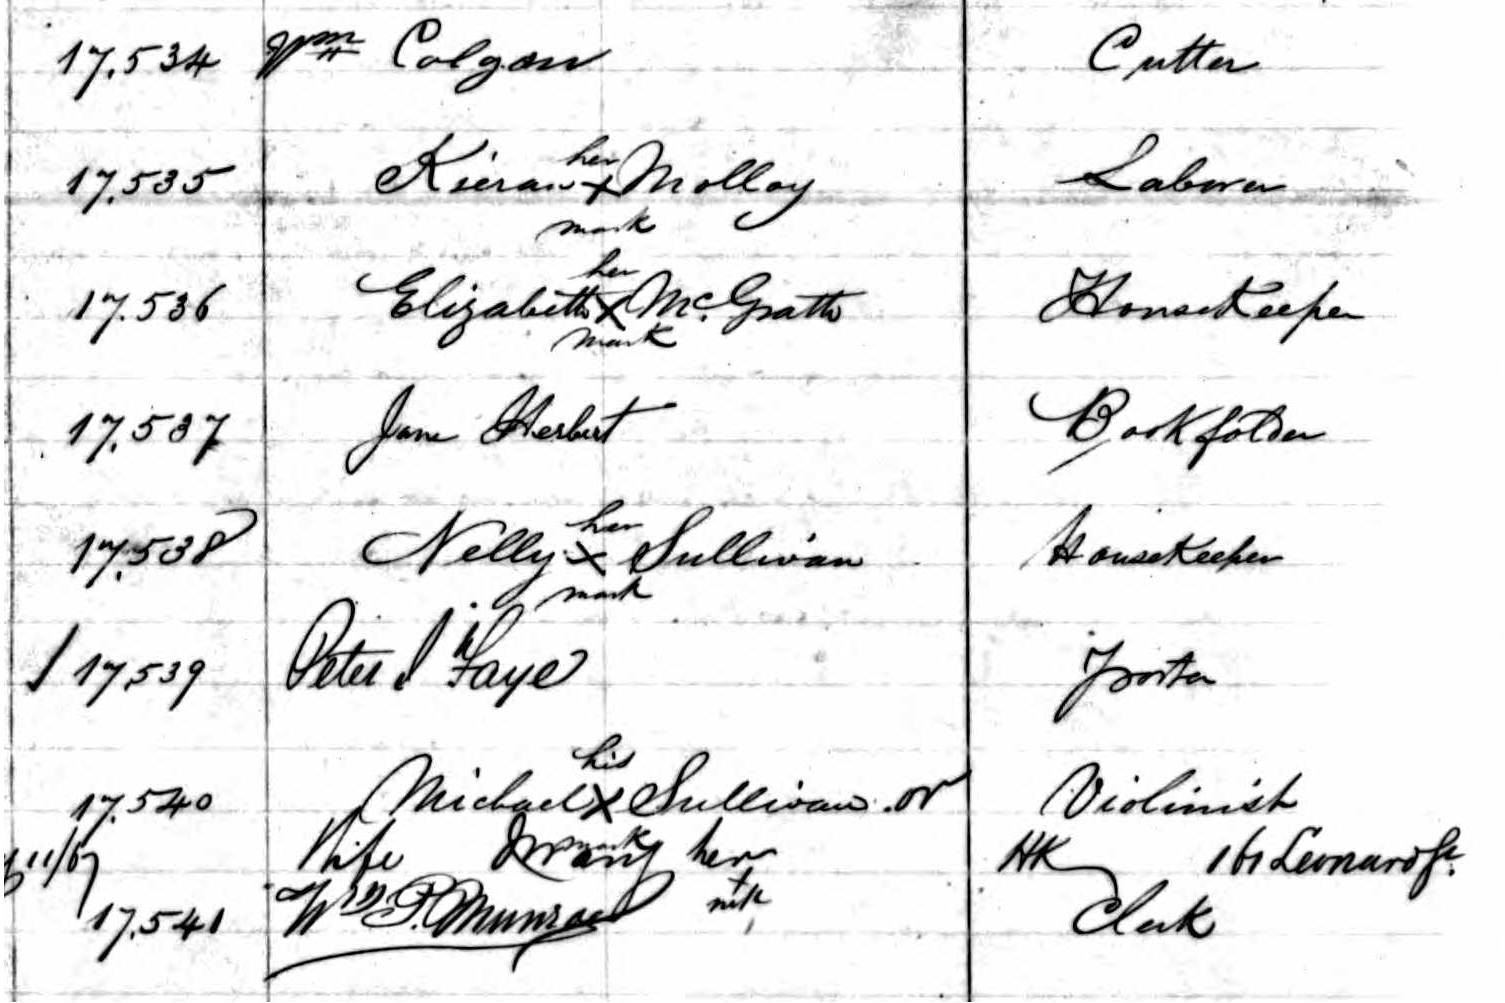 A record from the Emigrant Savings Bank shows the names and occupations of depositors, including Peter J. Faye. 